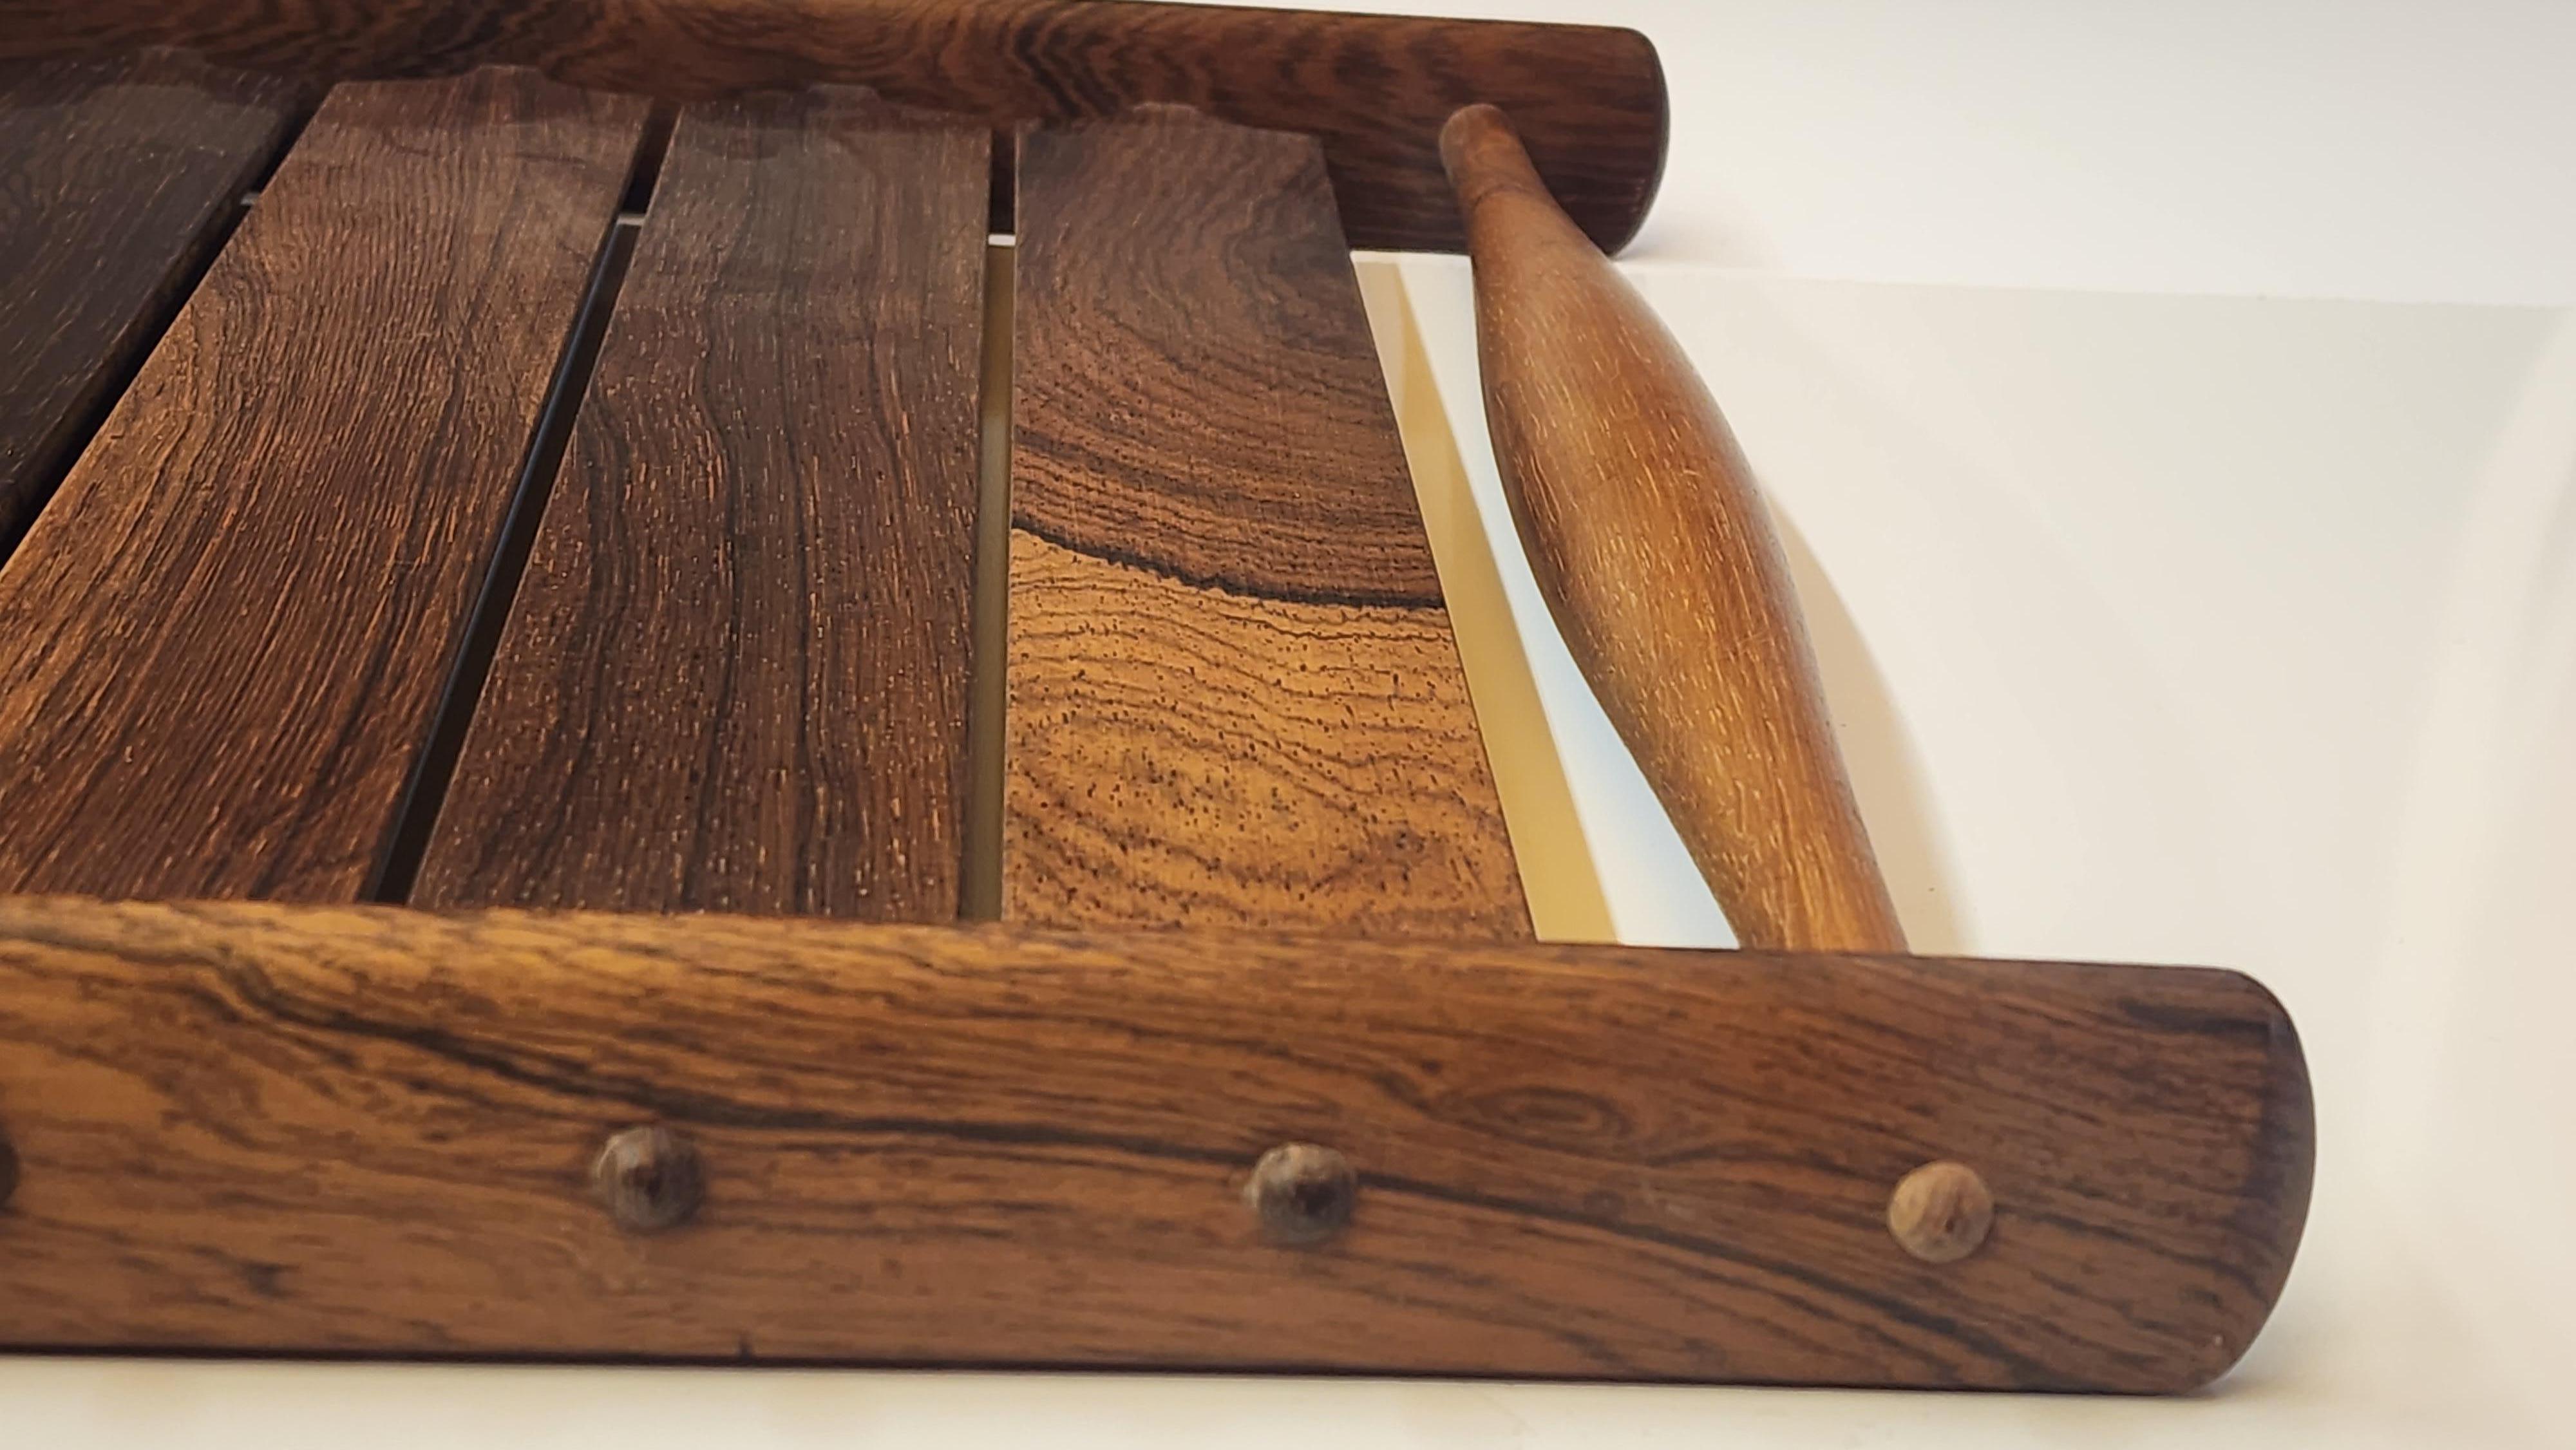 Wonderful desirable and rare Slatted Brazilian Rosewood Tray by Jens Quistgaard from his Rare Woods series of objects.   Composed of 10 arrow type slats with curved backs all constructrd using finger tenon's mortised through the end rails which hold